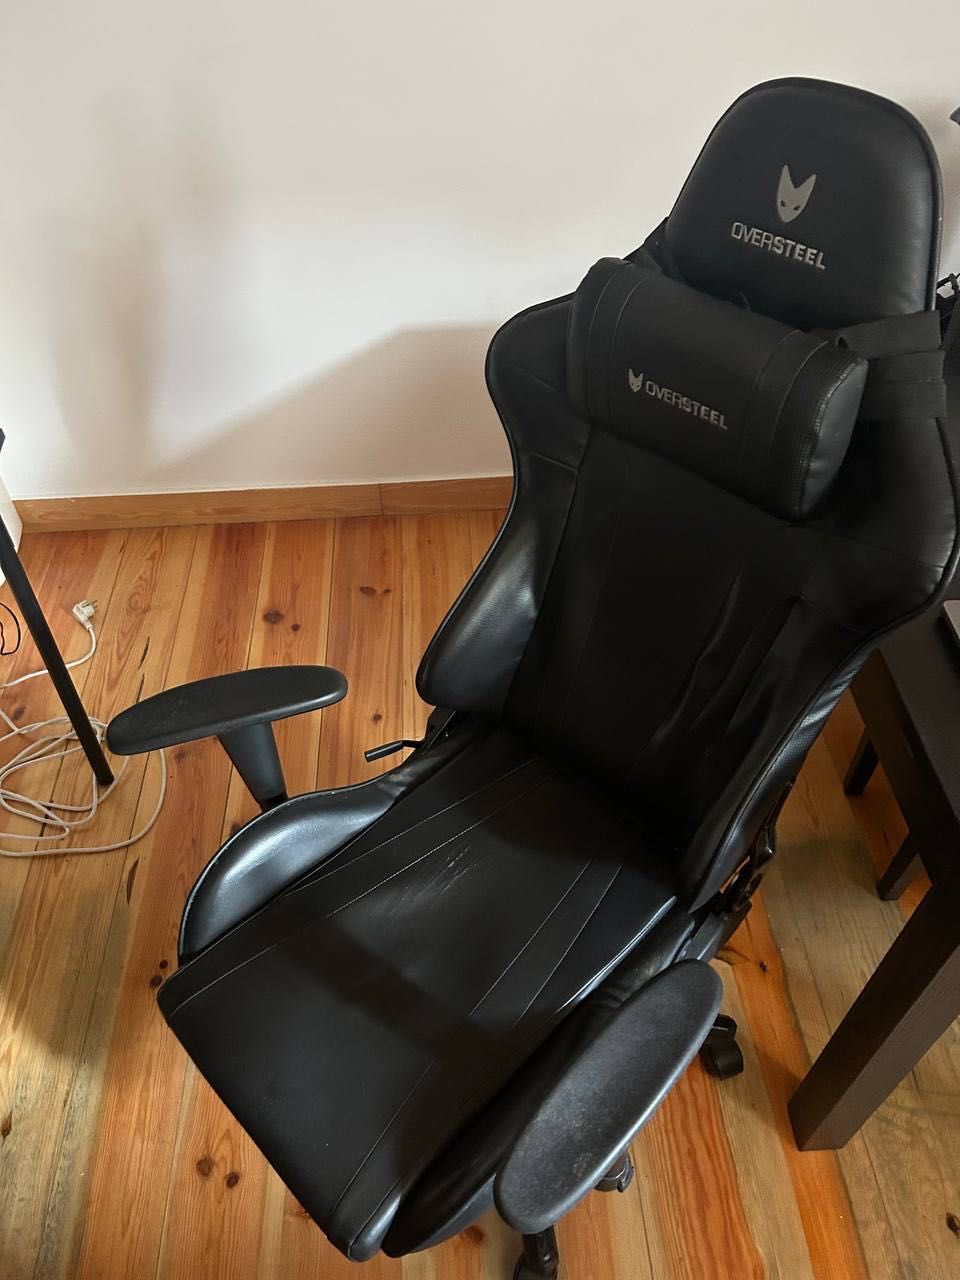 Gaming chair for